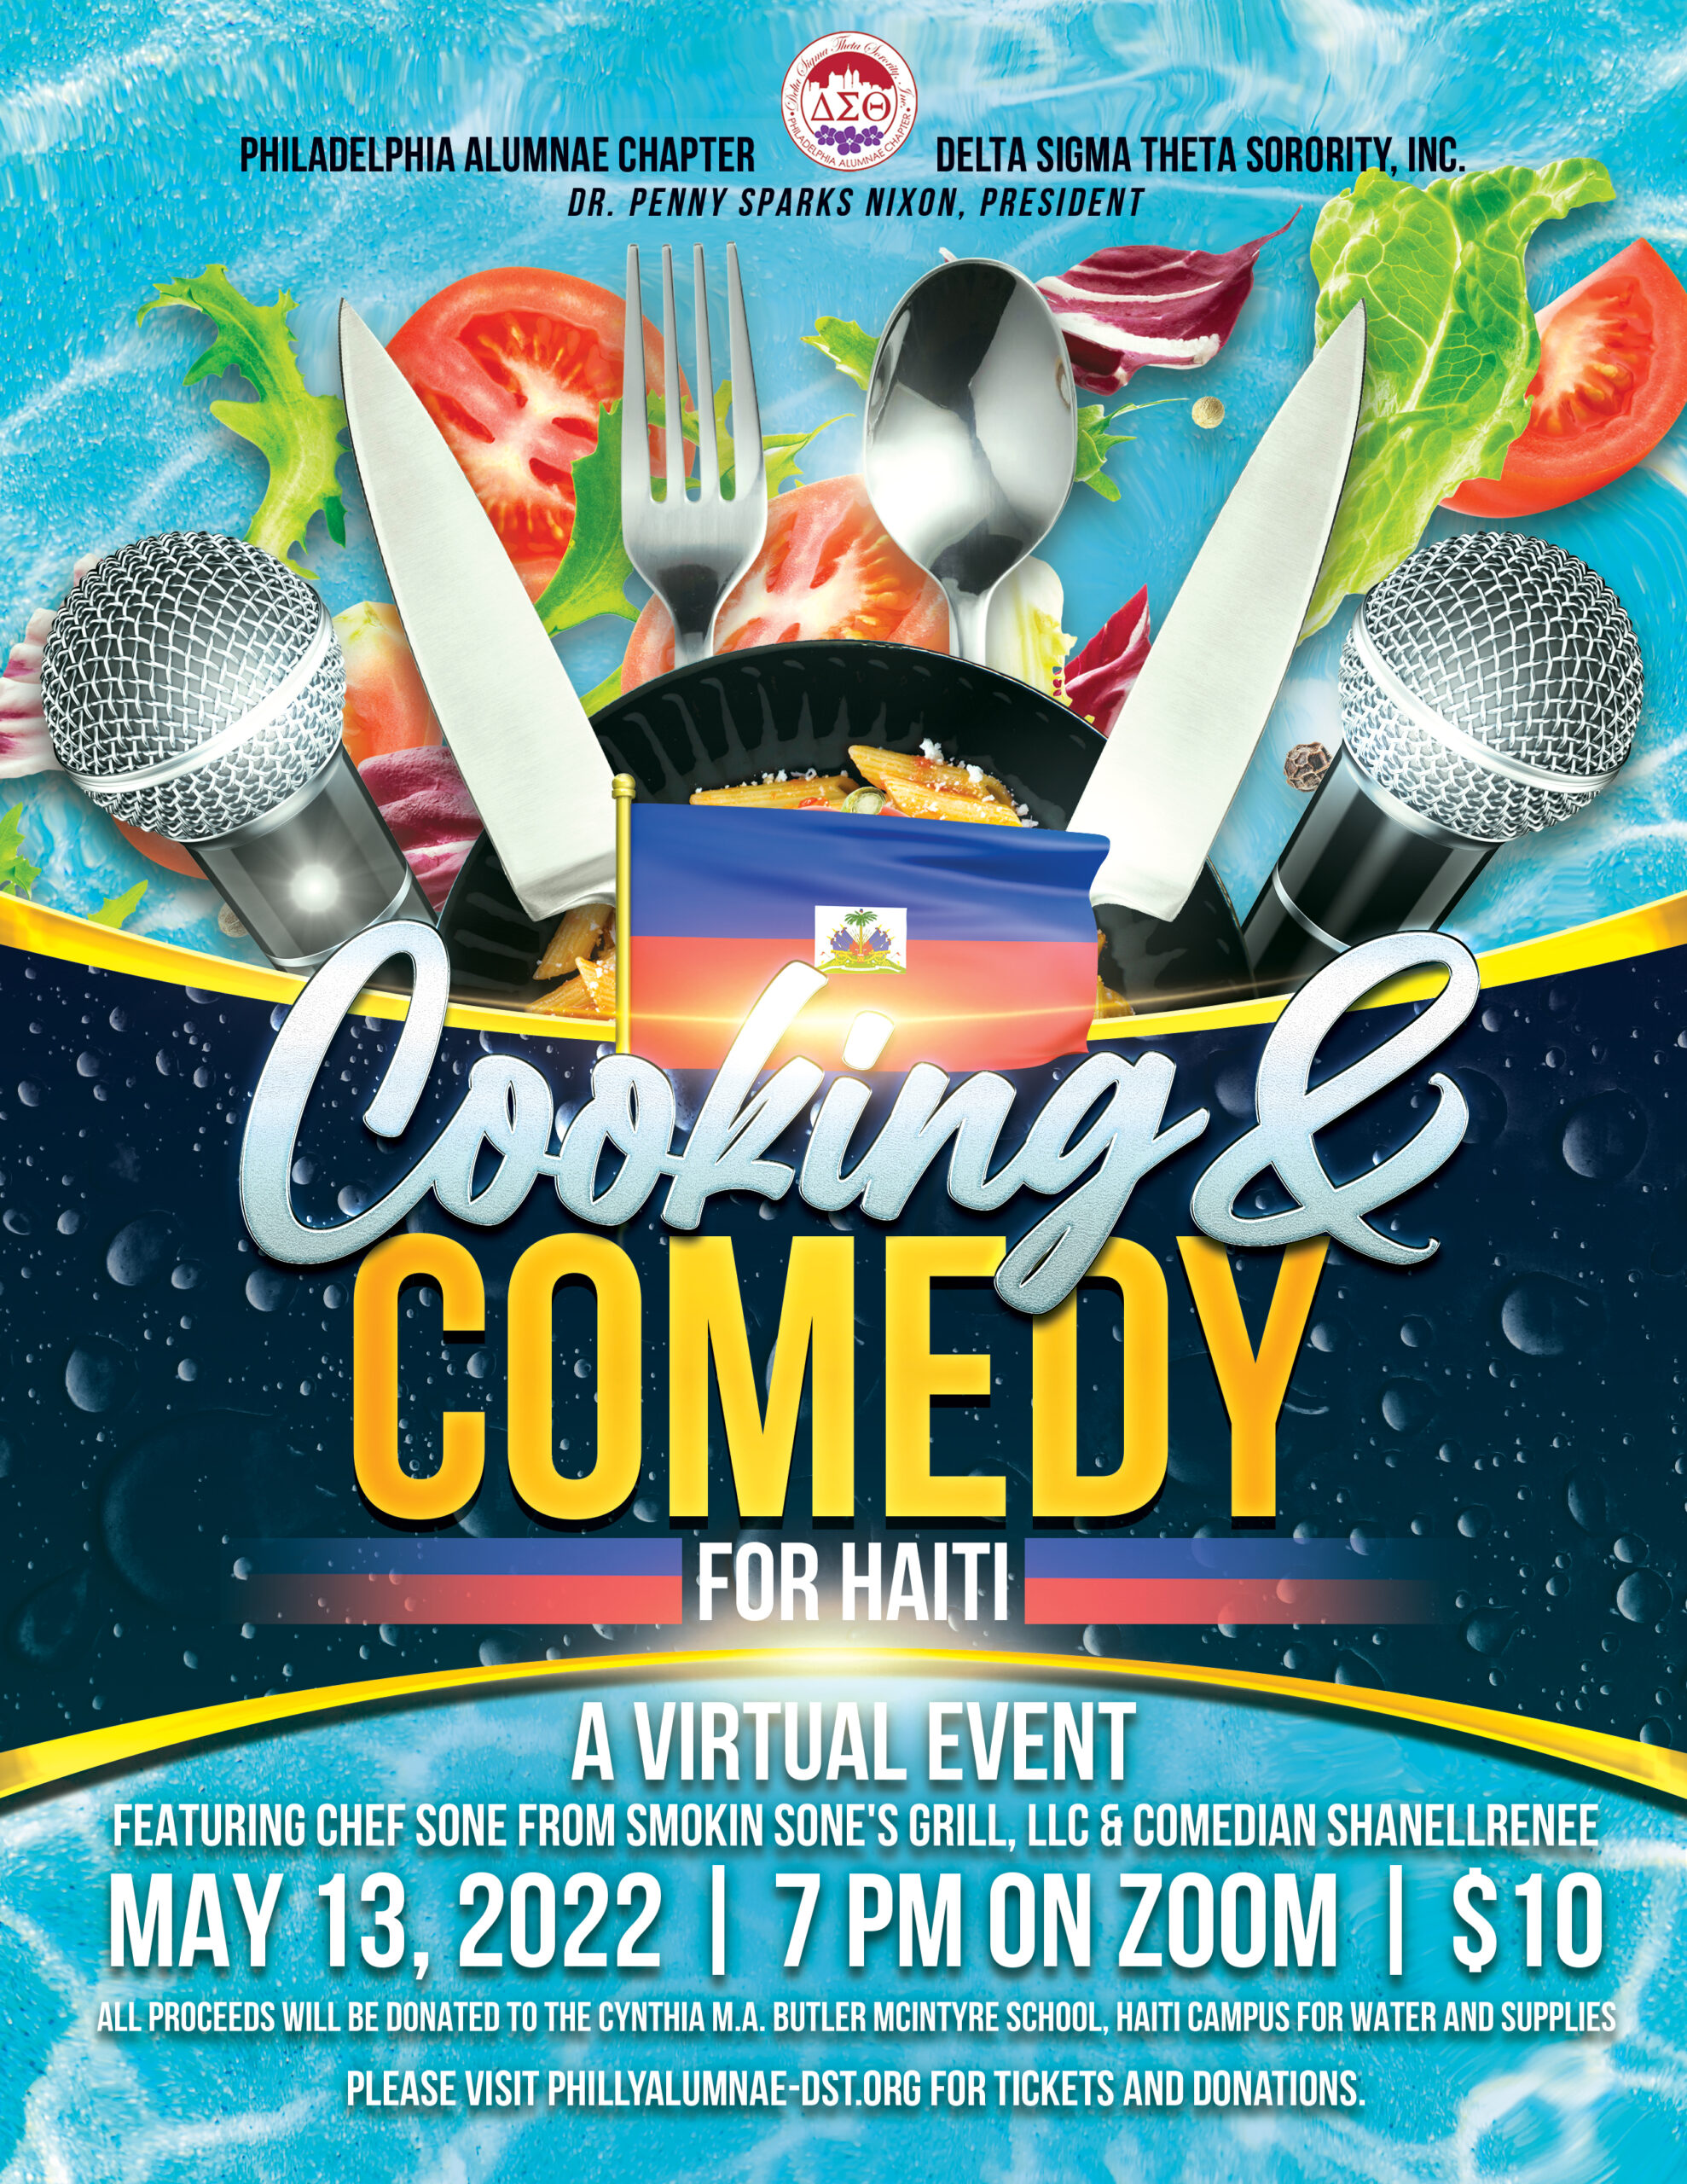 Cooking & Comedy for Haiti